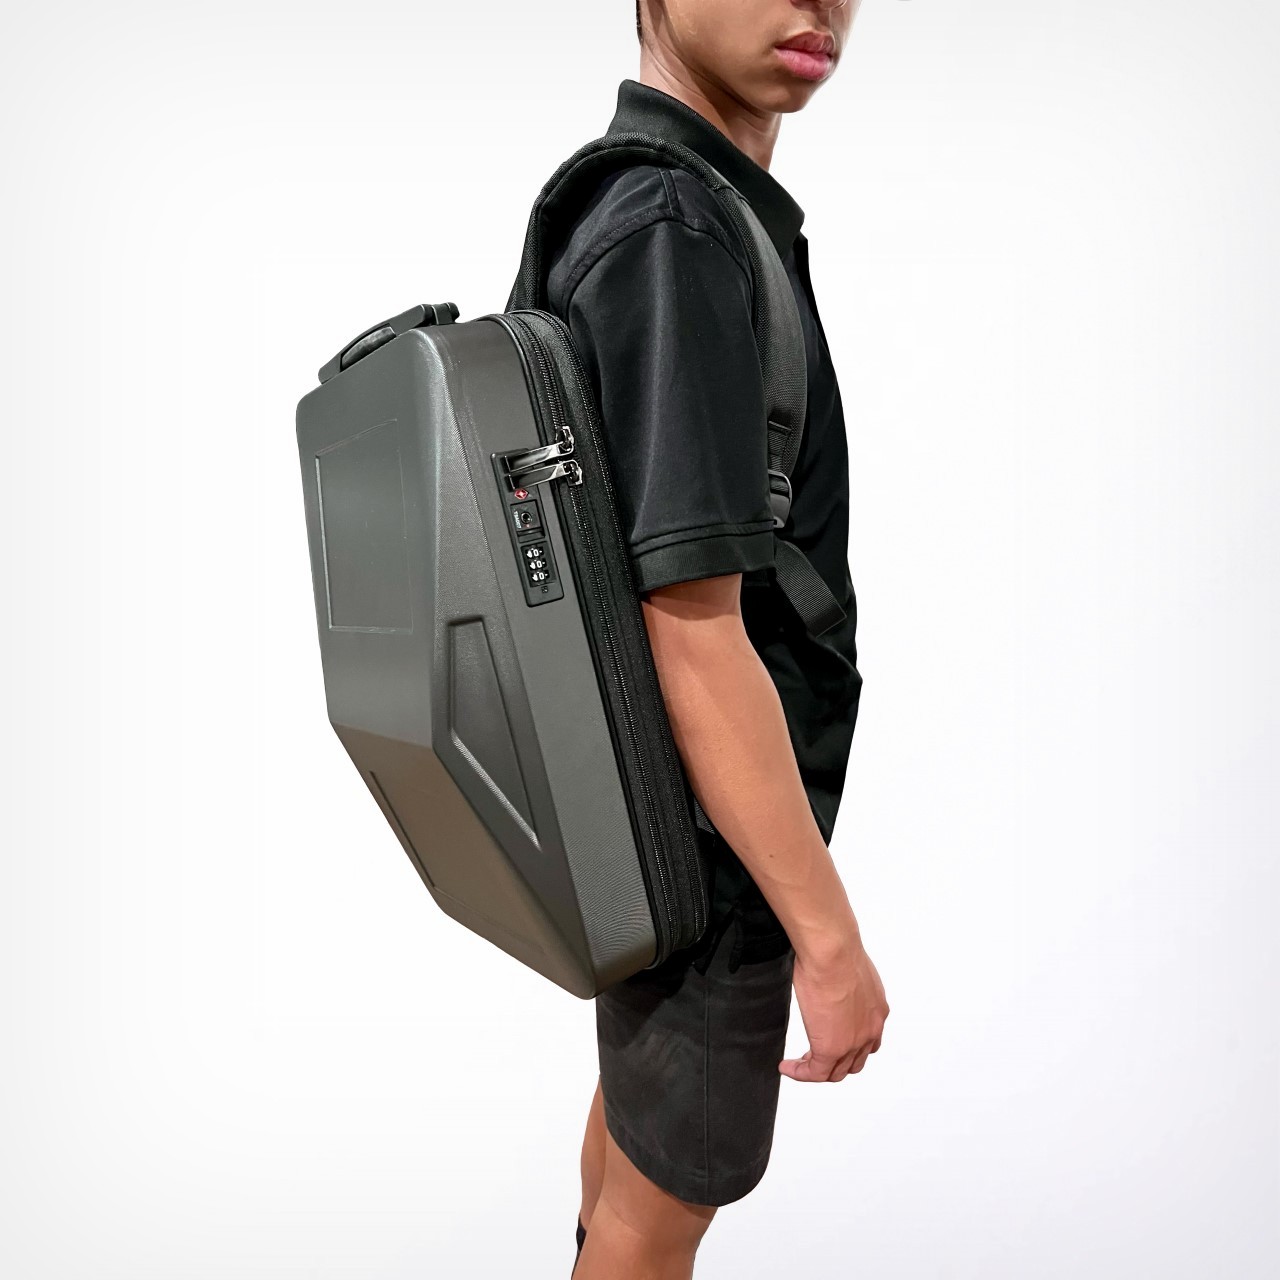 This Cybertruck-shaped hardshell backpack is the latest weird must 